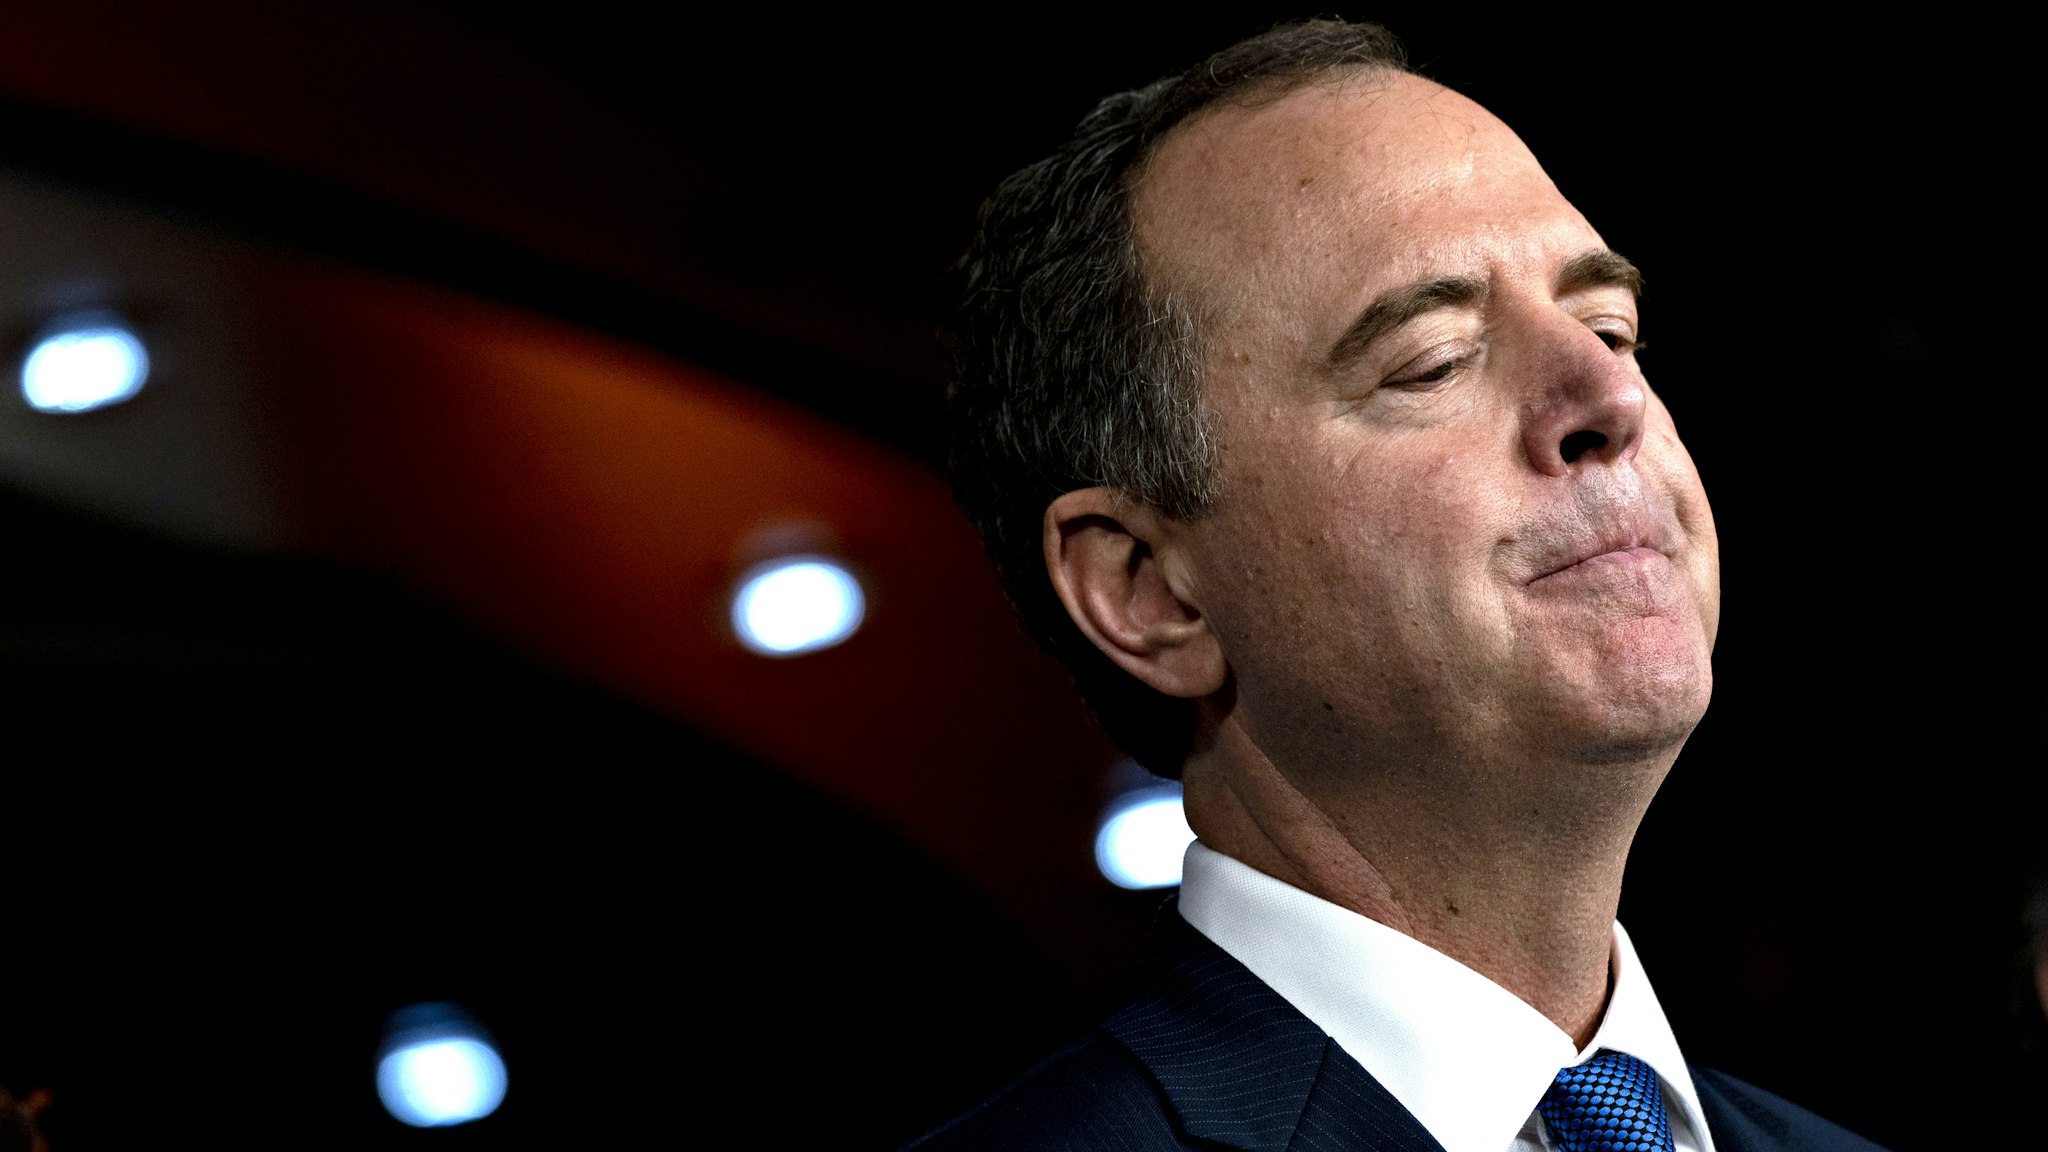 Representative Adam Schiff, a Democrat from California and chairman of the House Intelligence Committee, pauses while speaking during a news conference on Capitol Hill in Washington, D.C., U.S., on Thursday, Oct. 31, 2019.